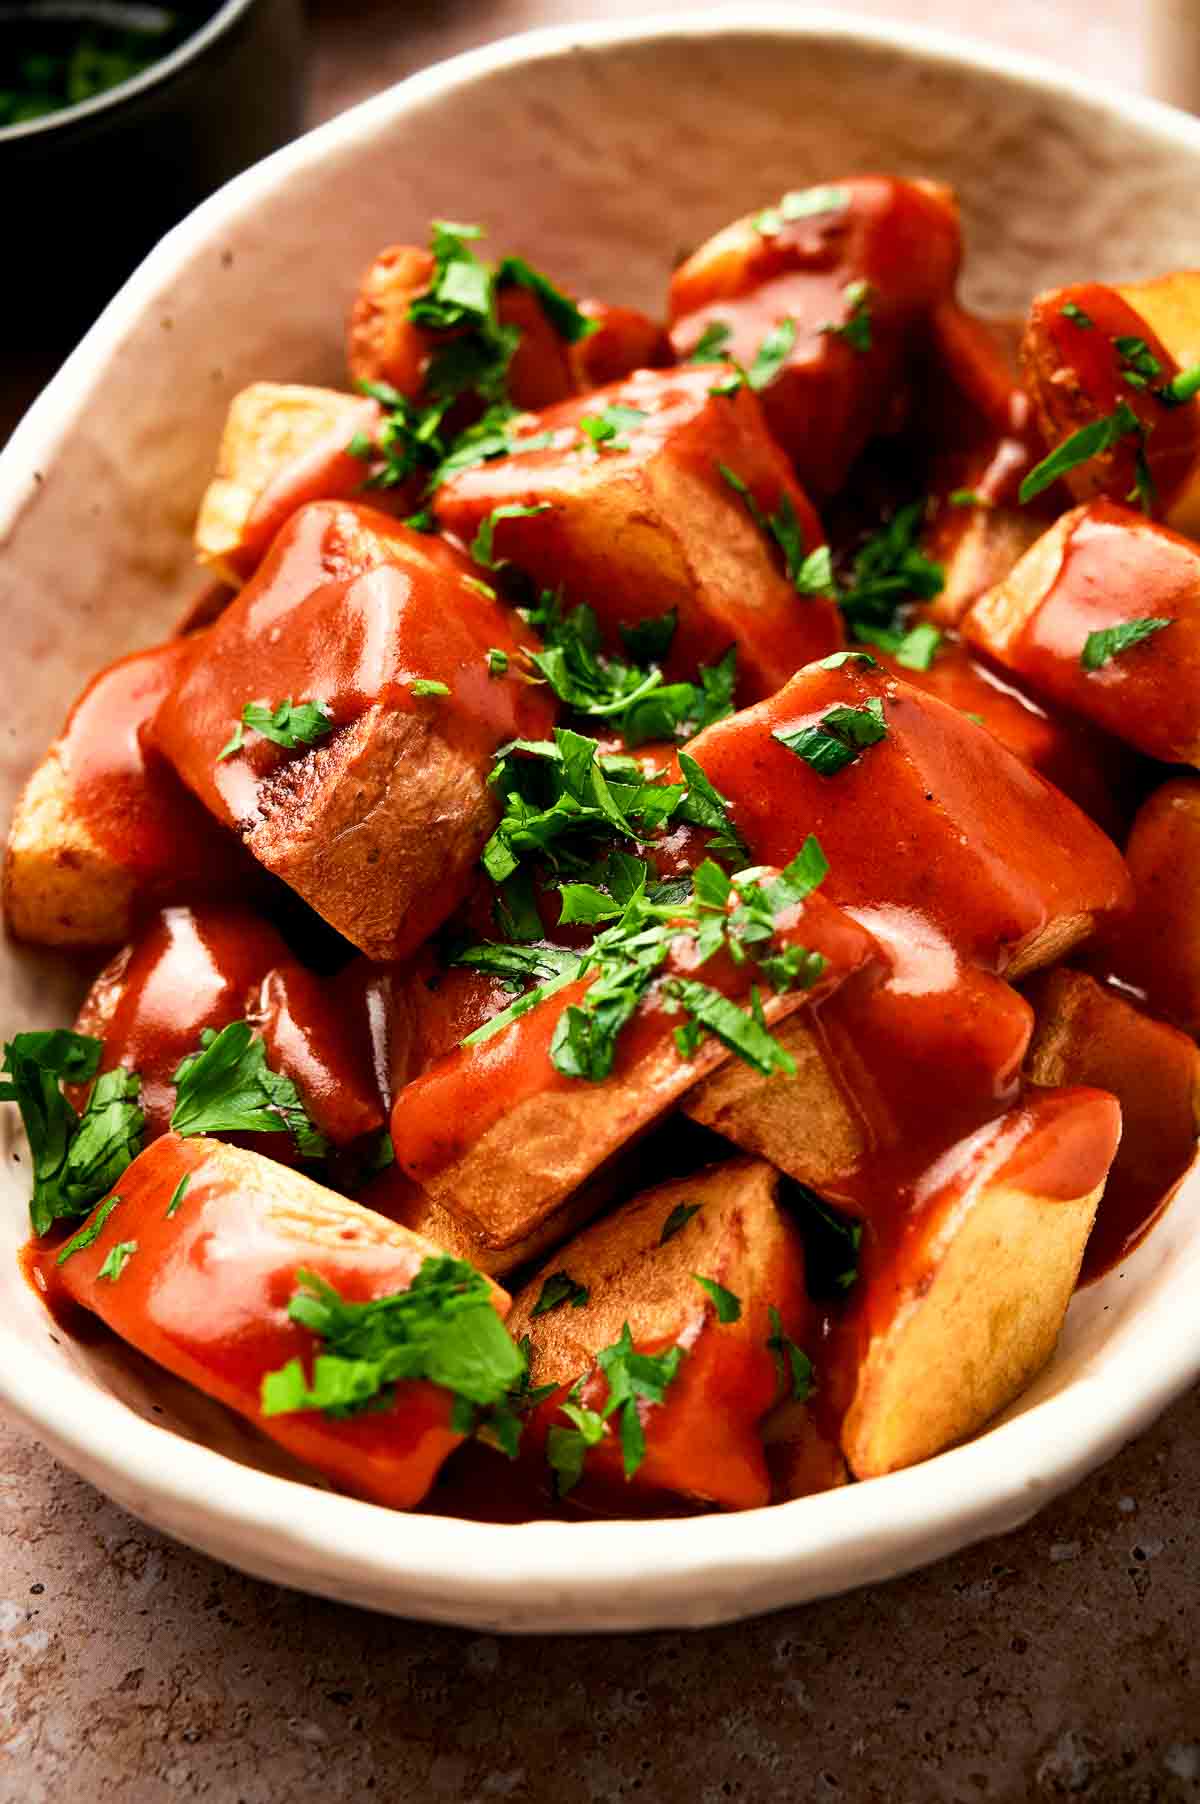 A close-up of patatas bravas. The bravas salsa is red over the fried potatoes.